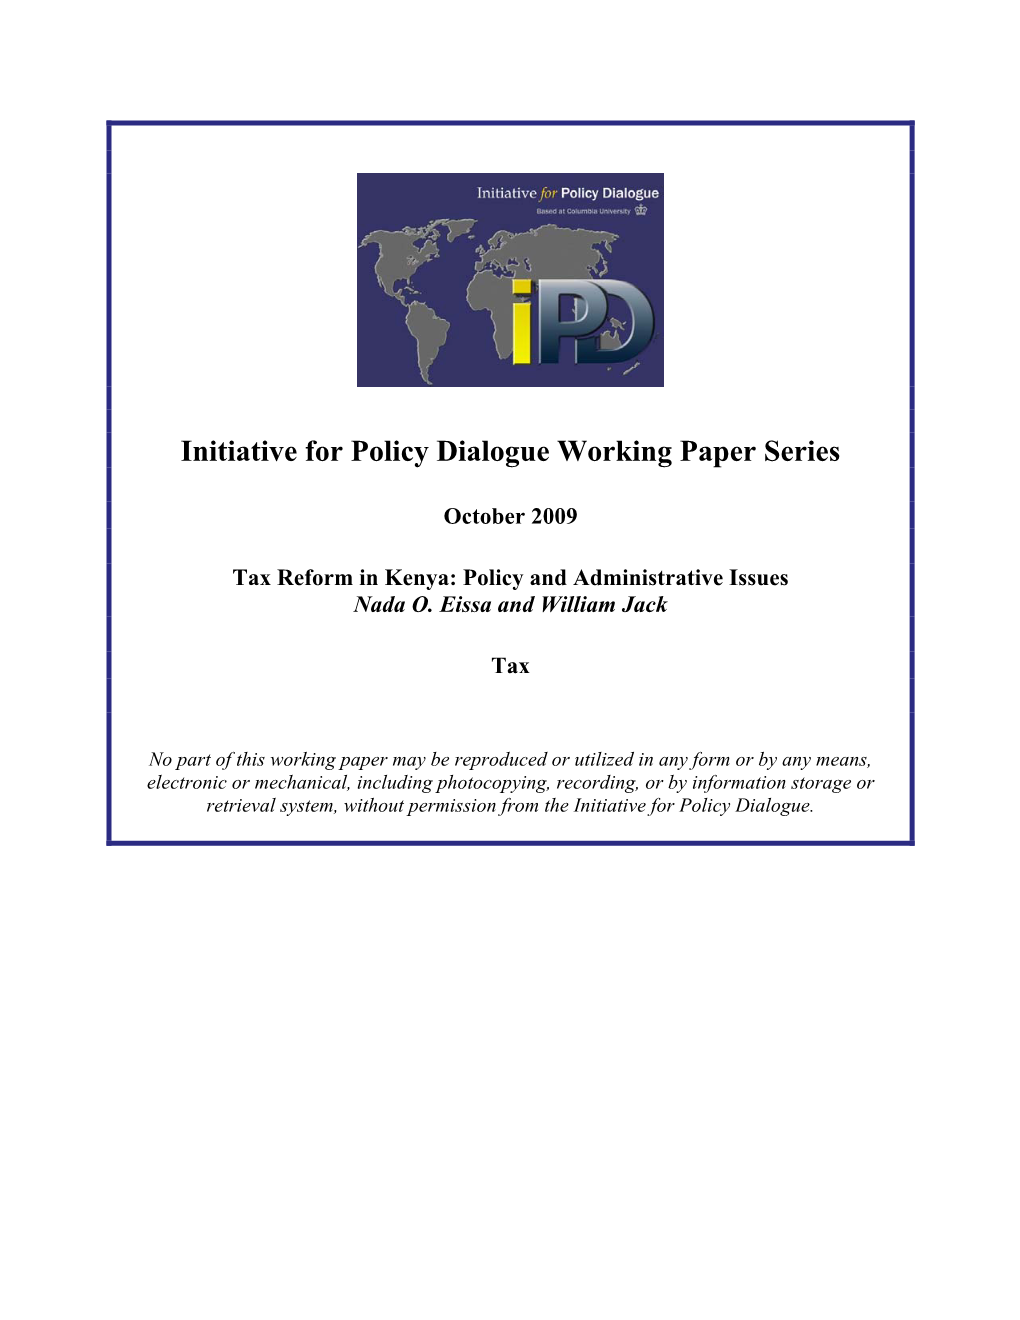 Tax Reform in Kenya: Policy and Administrative Issues Nada O